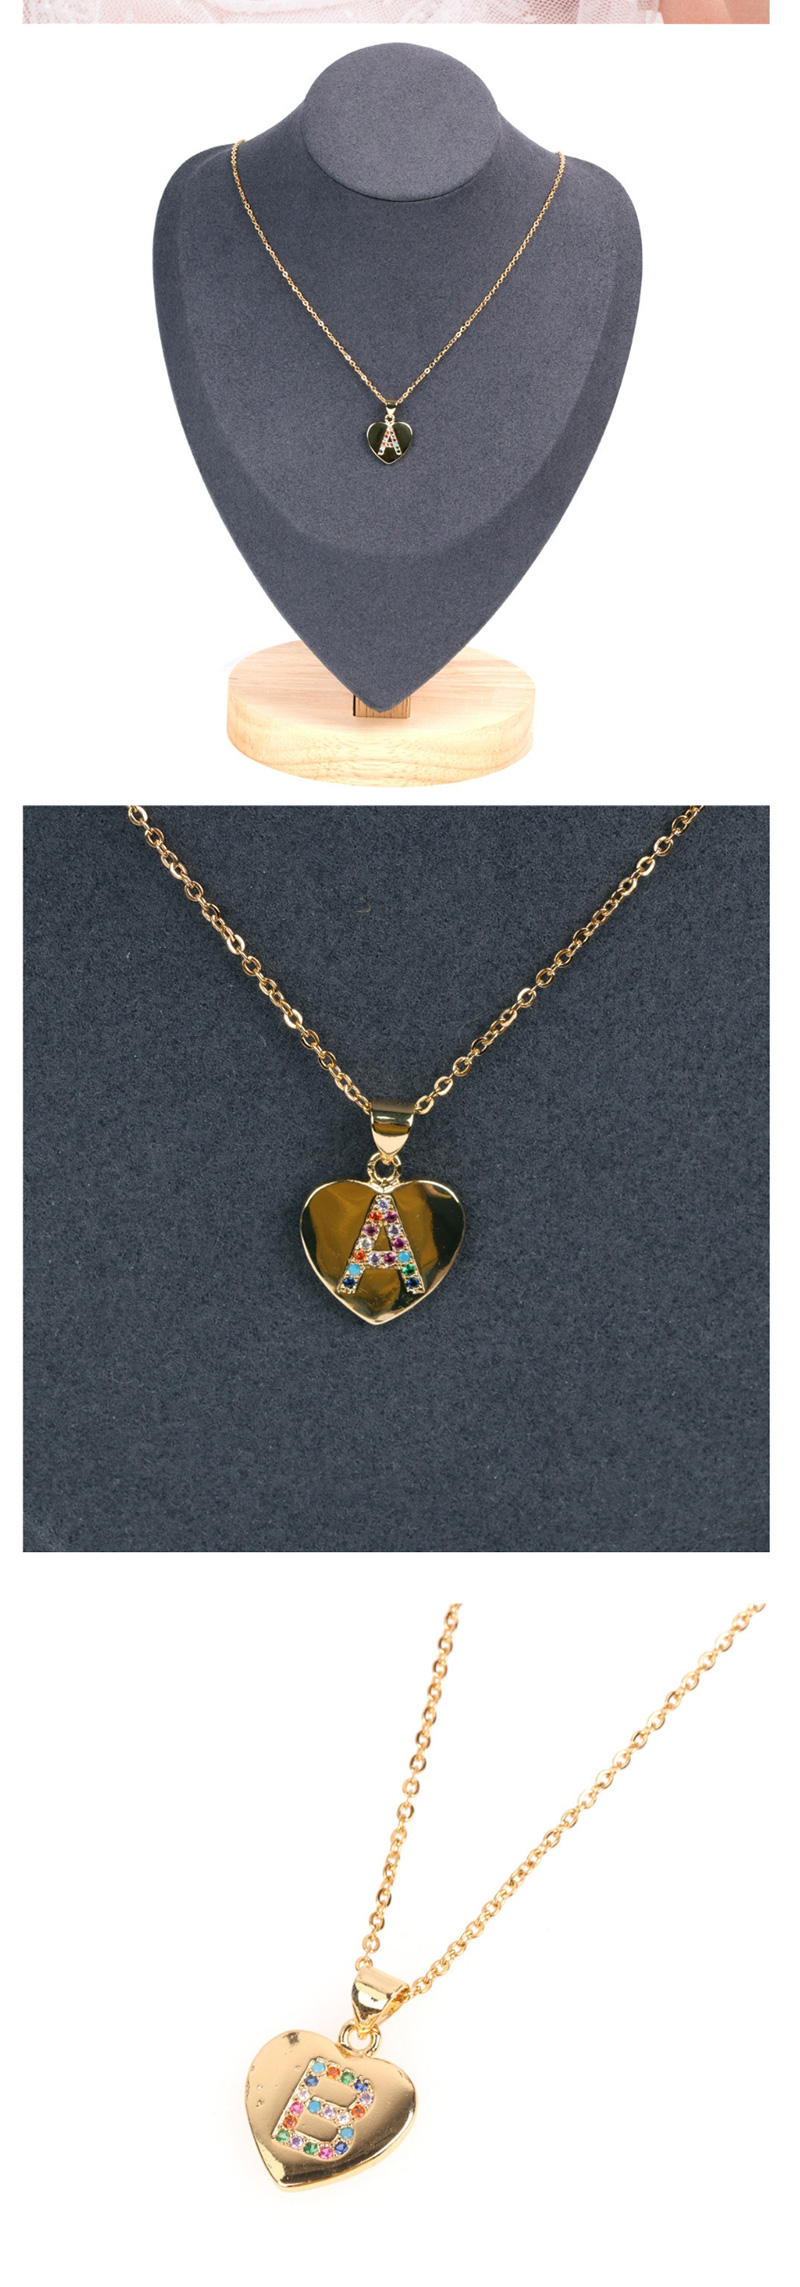 Fashion Golden N Micro Inlaid Zircon Love Letter Necklace,Necklaces